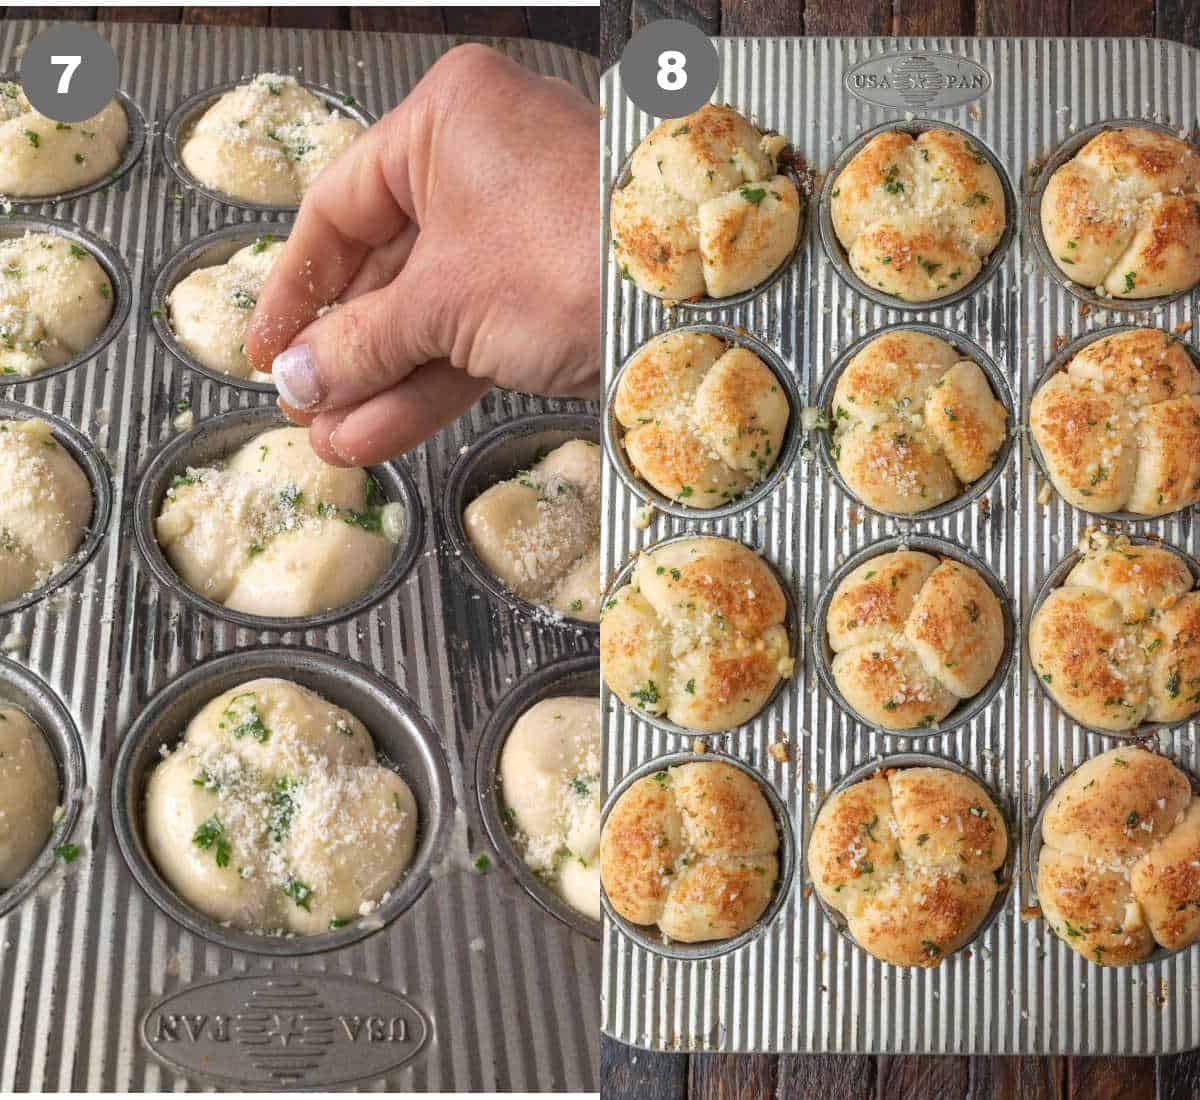 Parmesan sprinkled on top of rolls and baked.